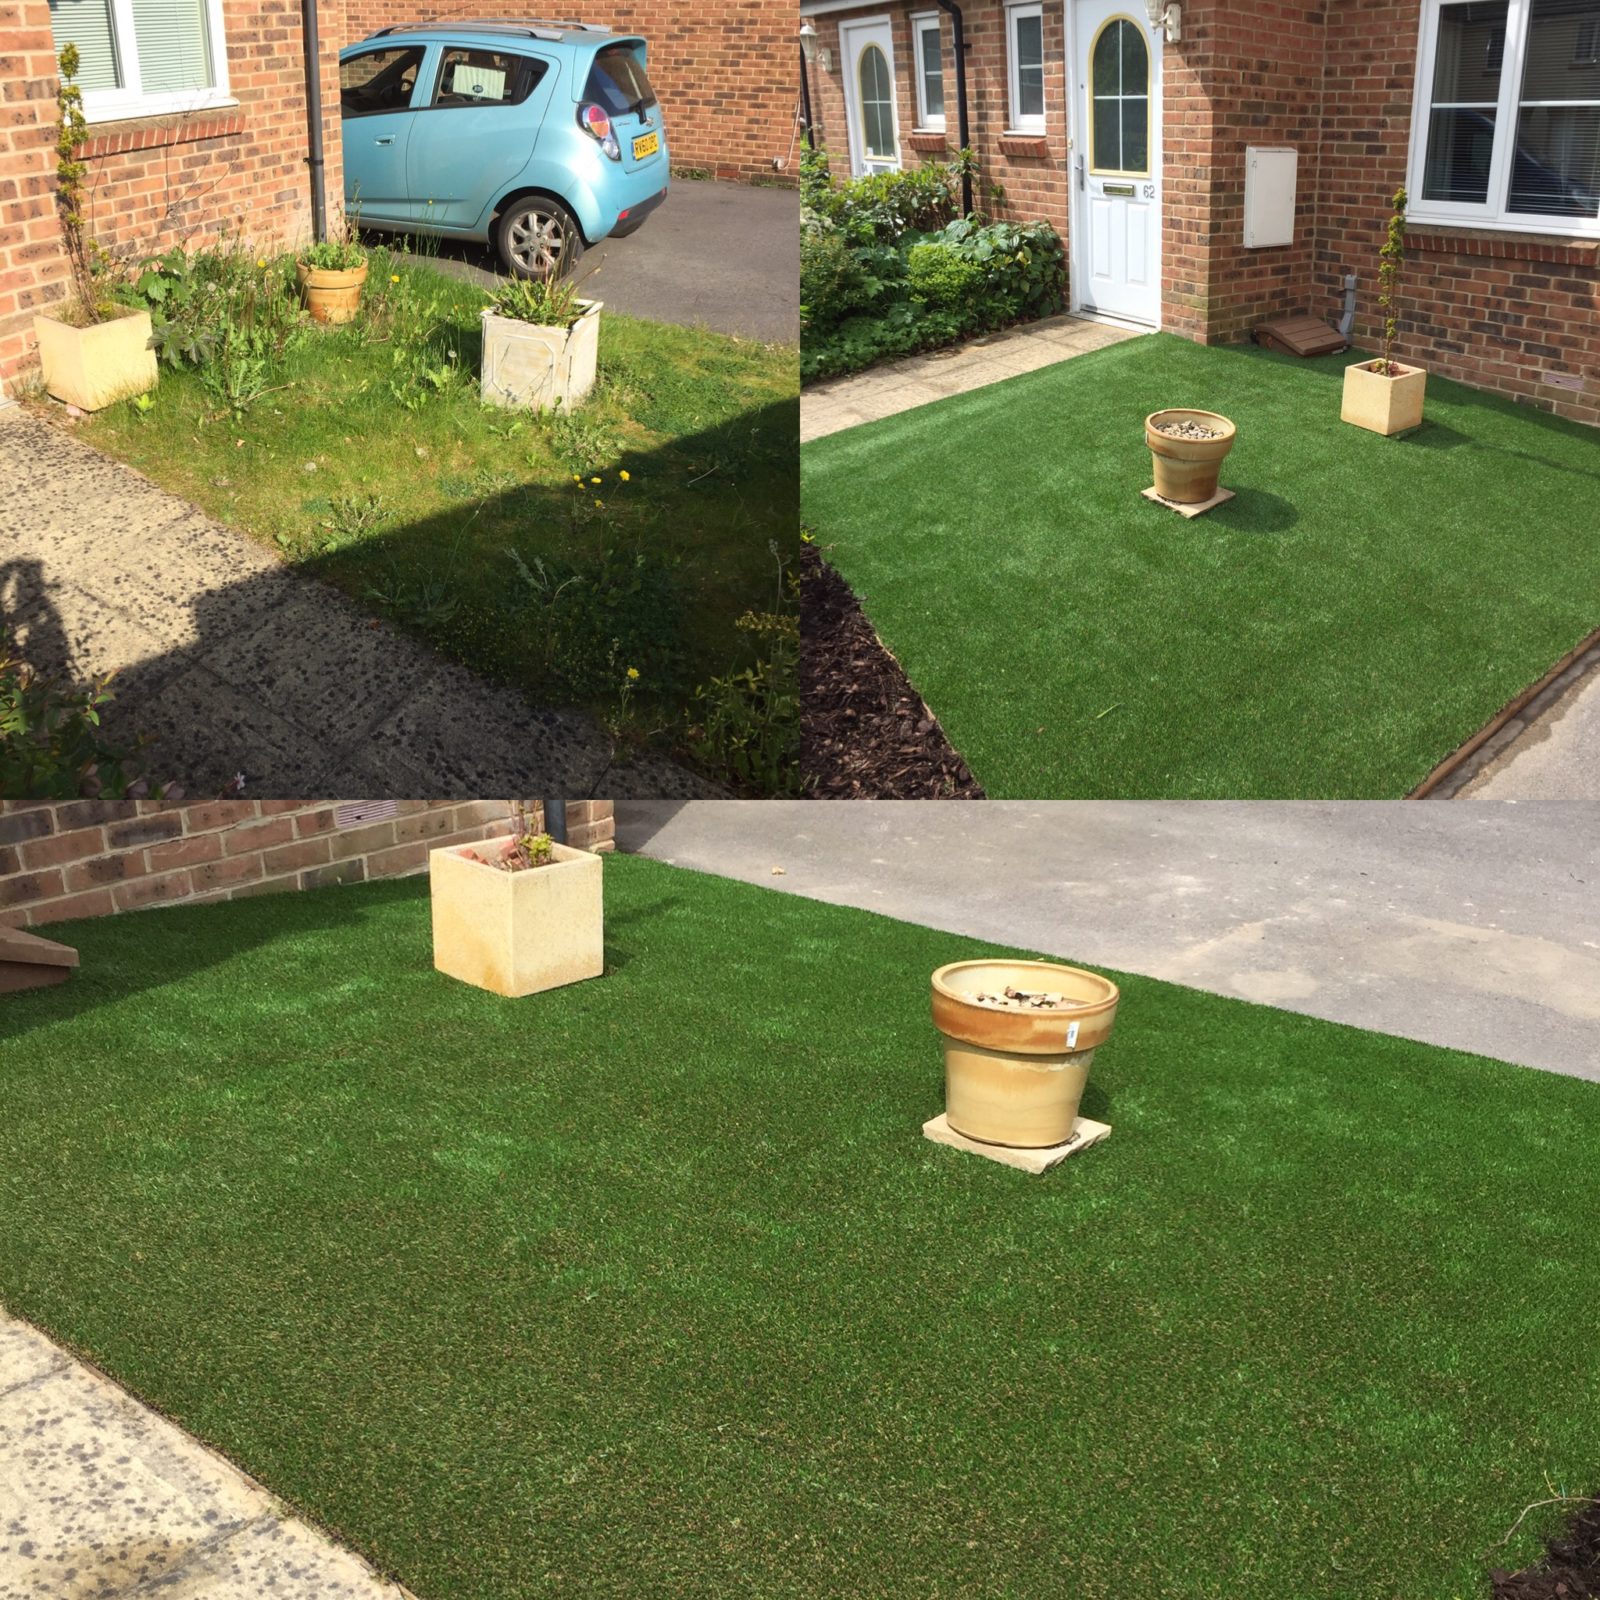 Image of a garden in Winnersh before and after